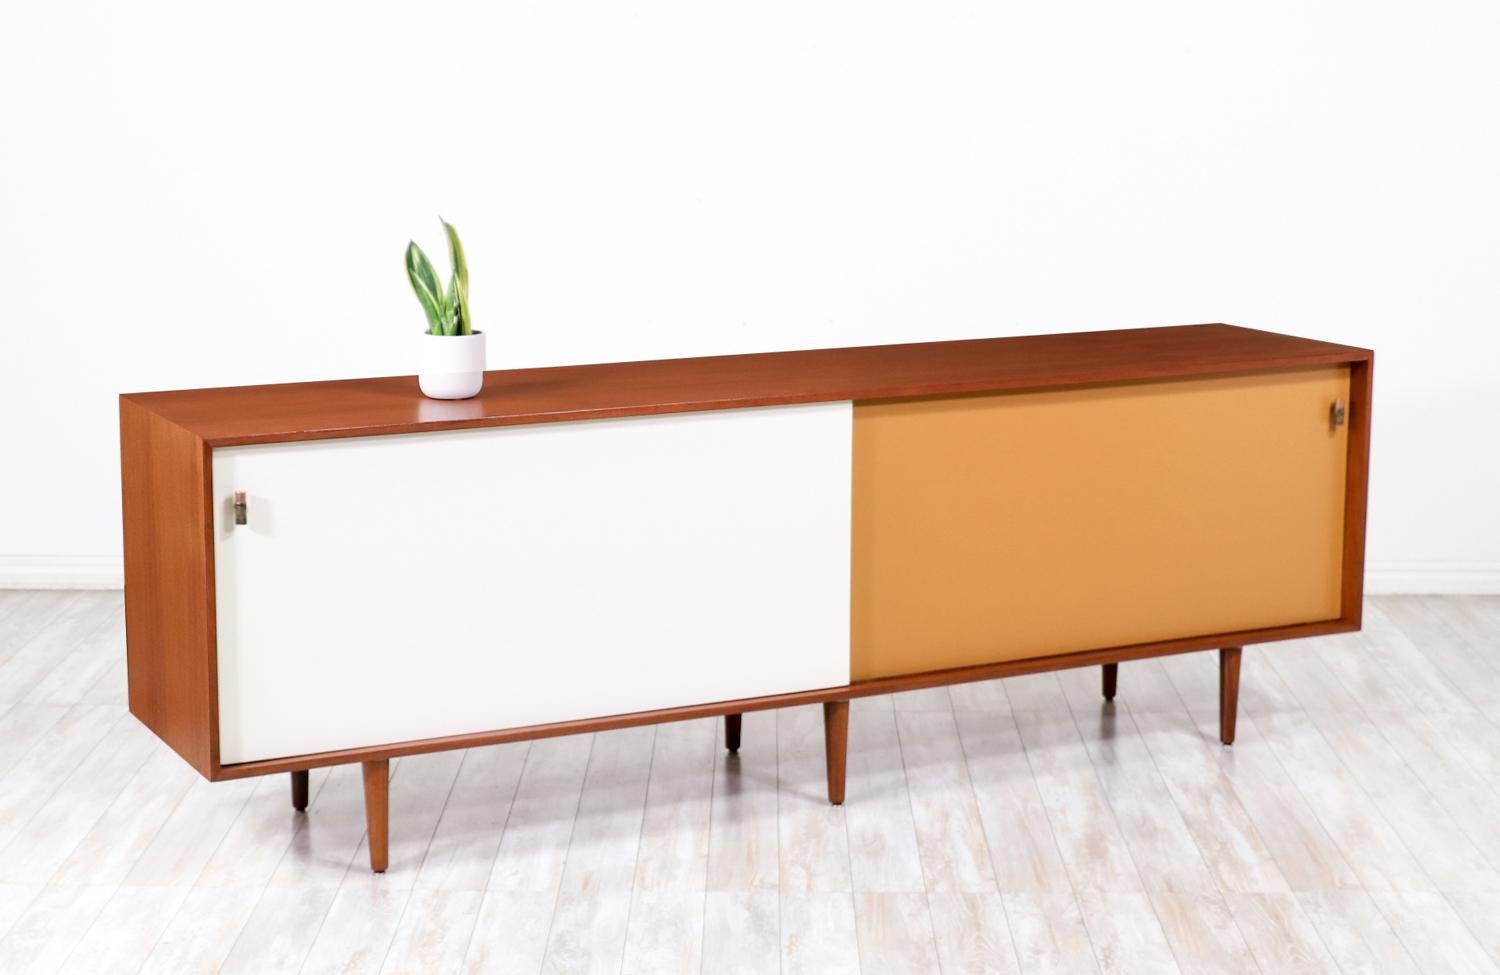 Mid-20th Century Expertly Restored - Danish Modern Teak Credenza with Two-Tone Lacquered-Doors